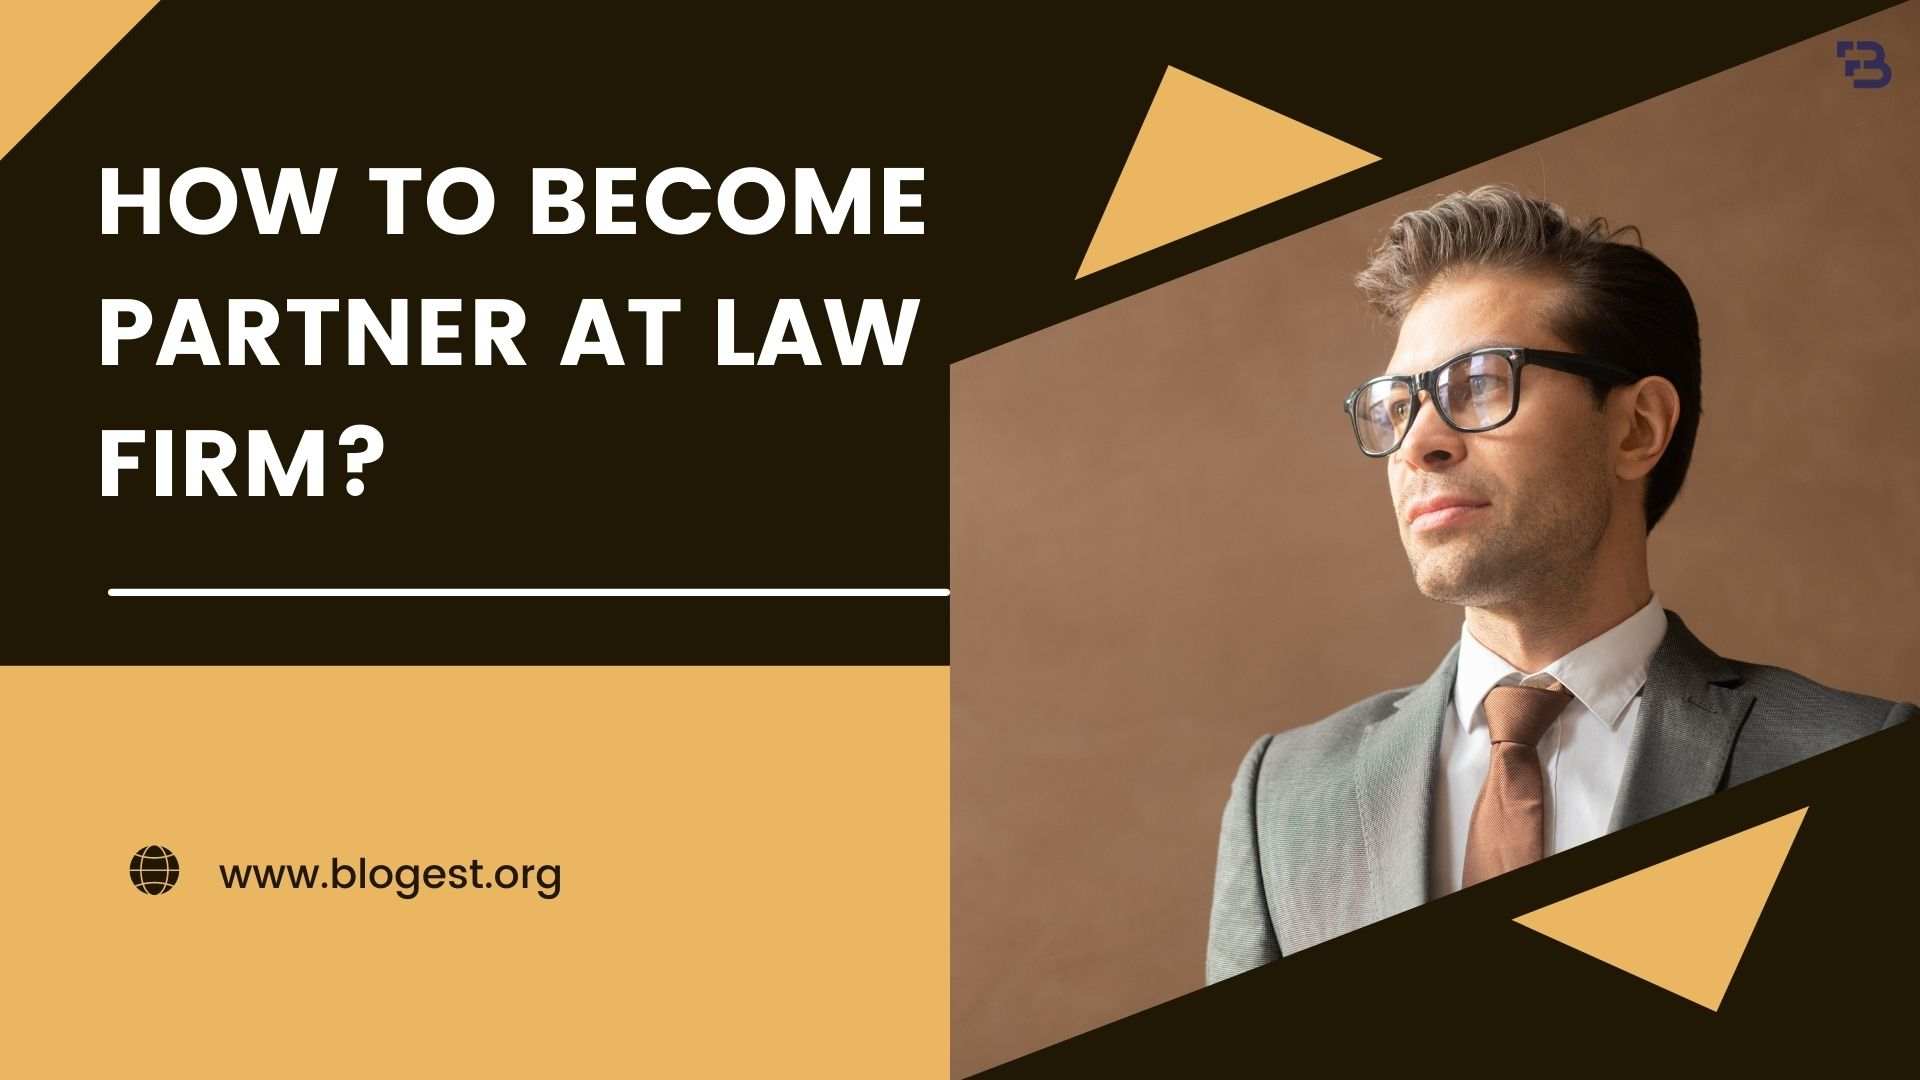 How To Become Partner At Law Firm? Full Guide